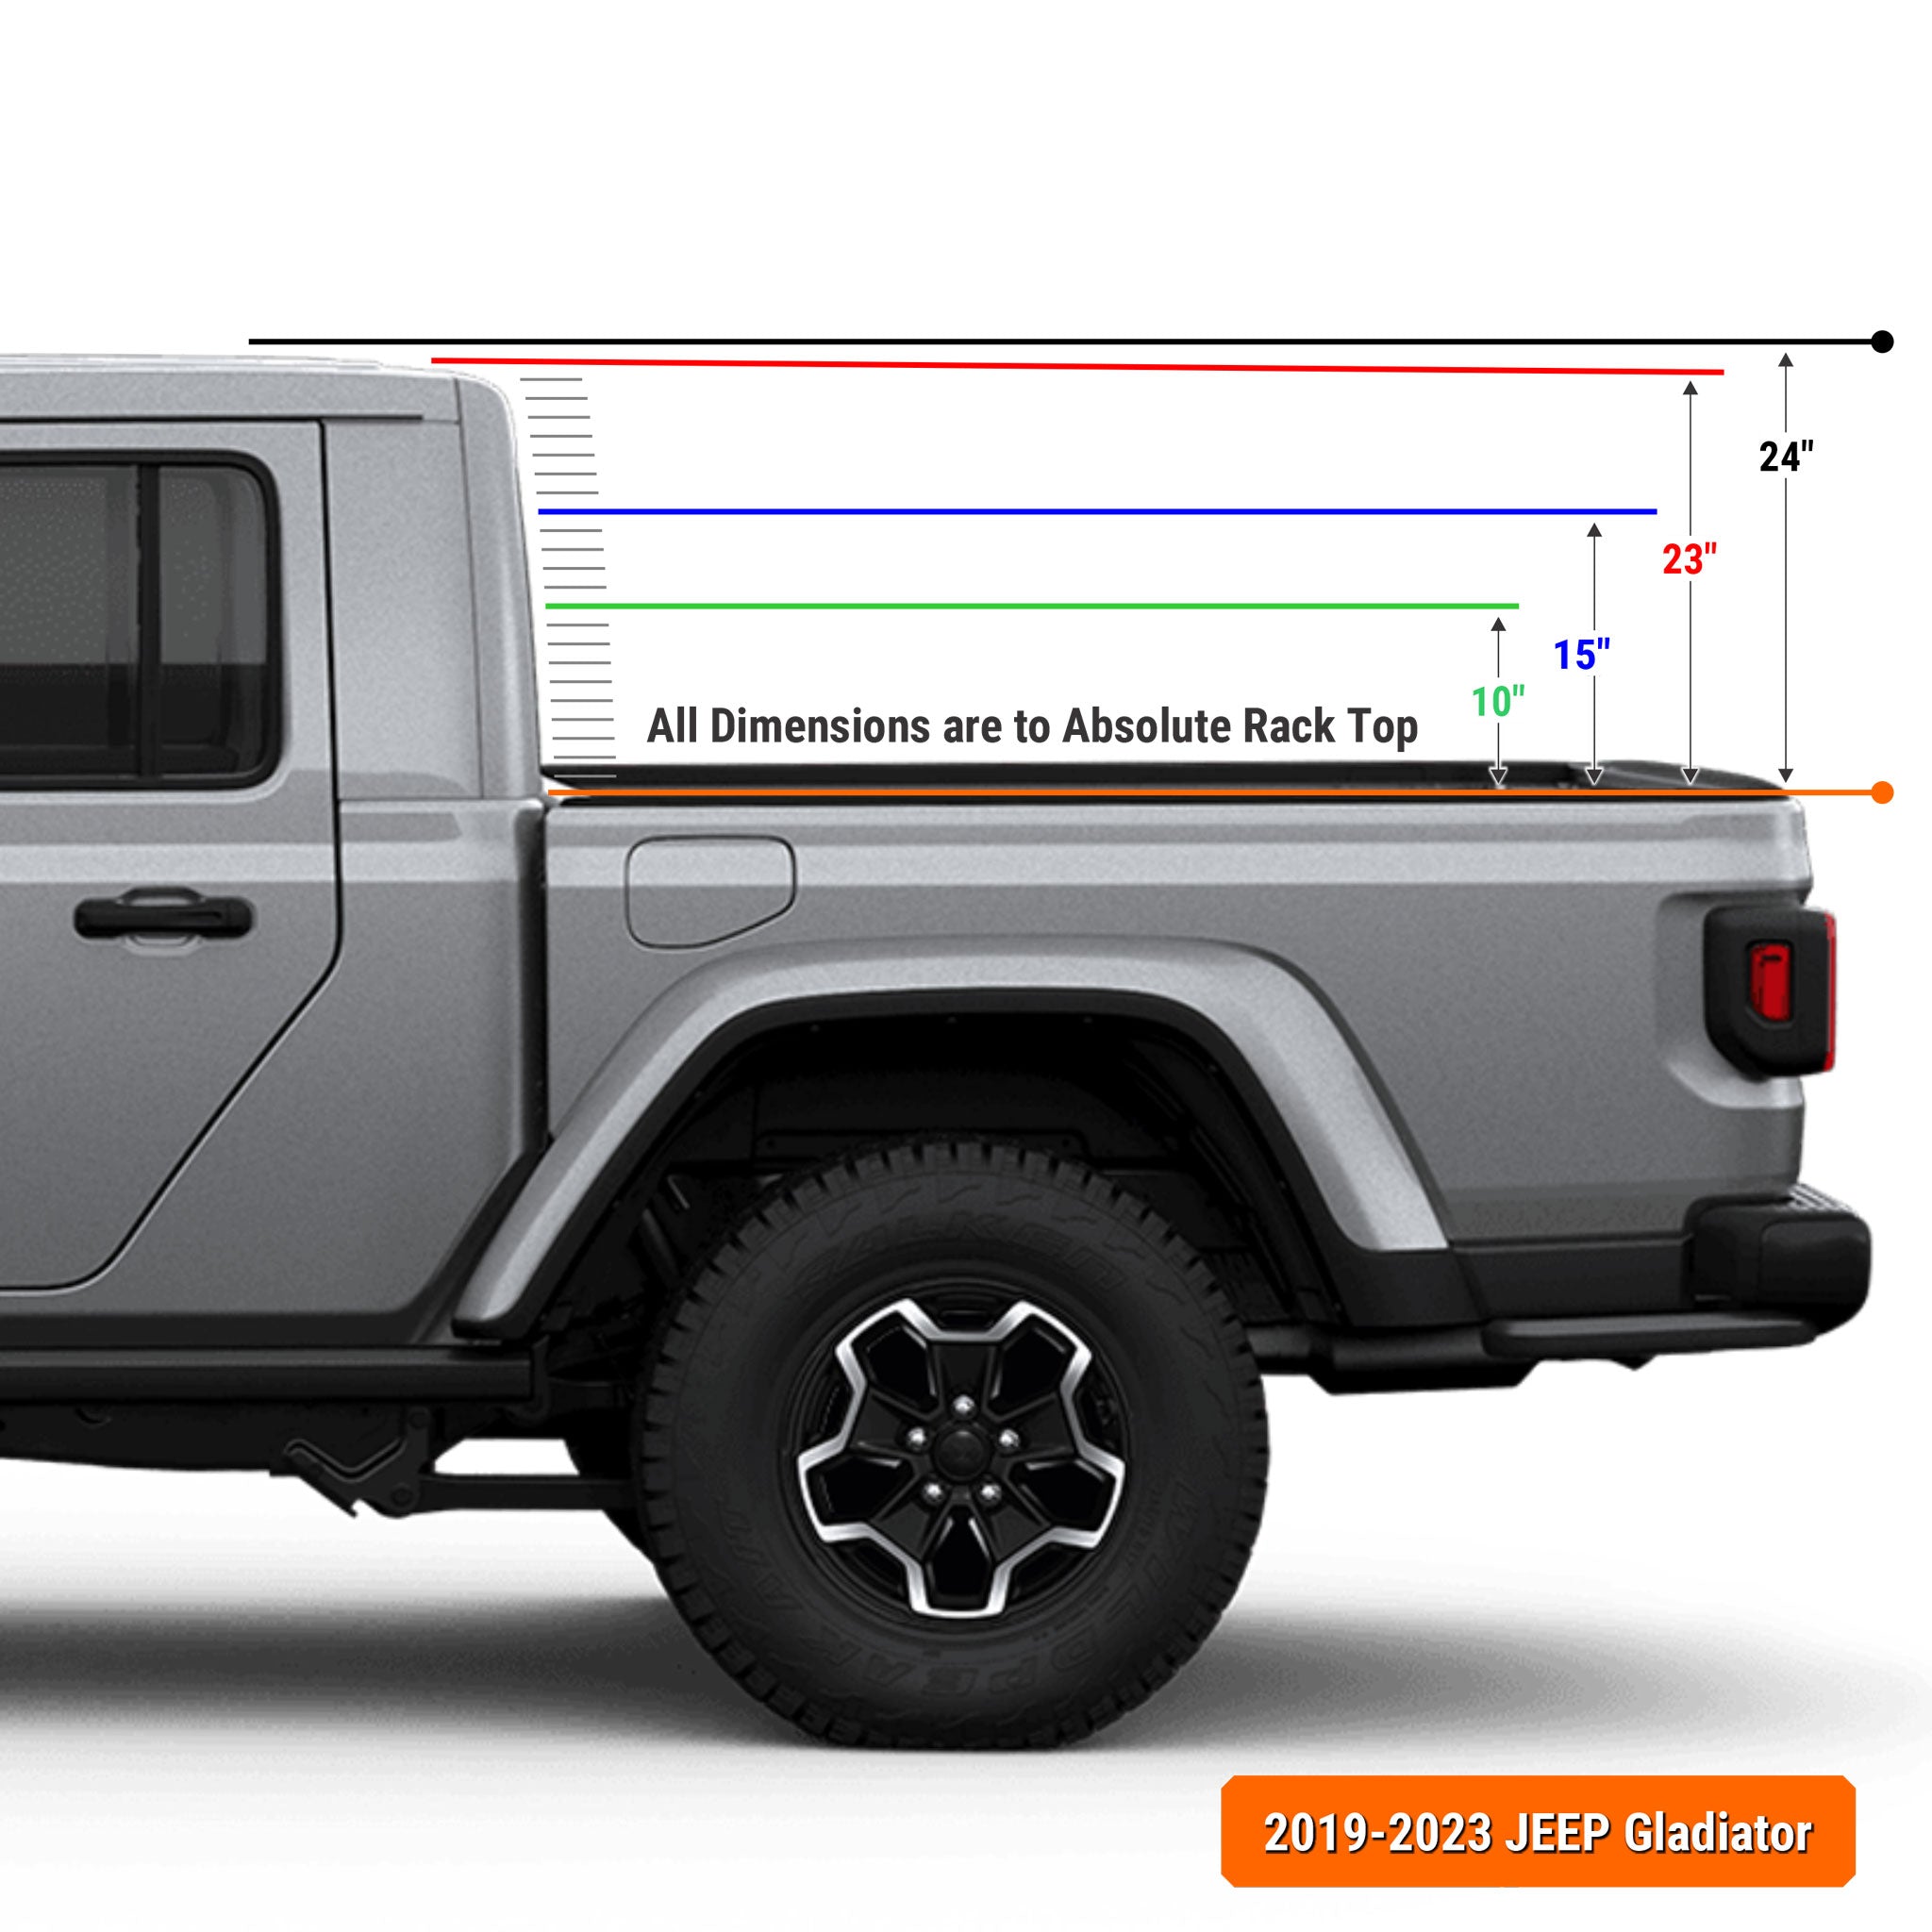 Jeep Gladiator Bed Rack Height Chart